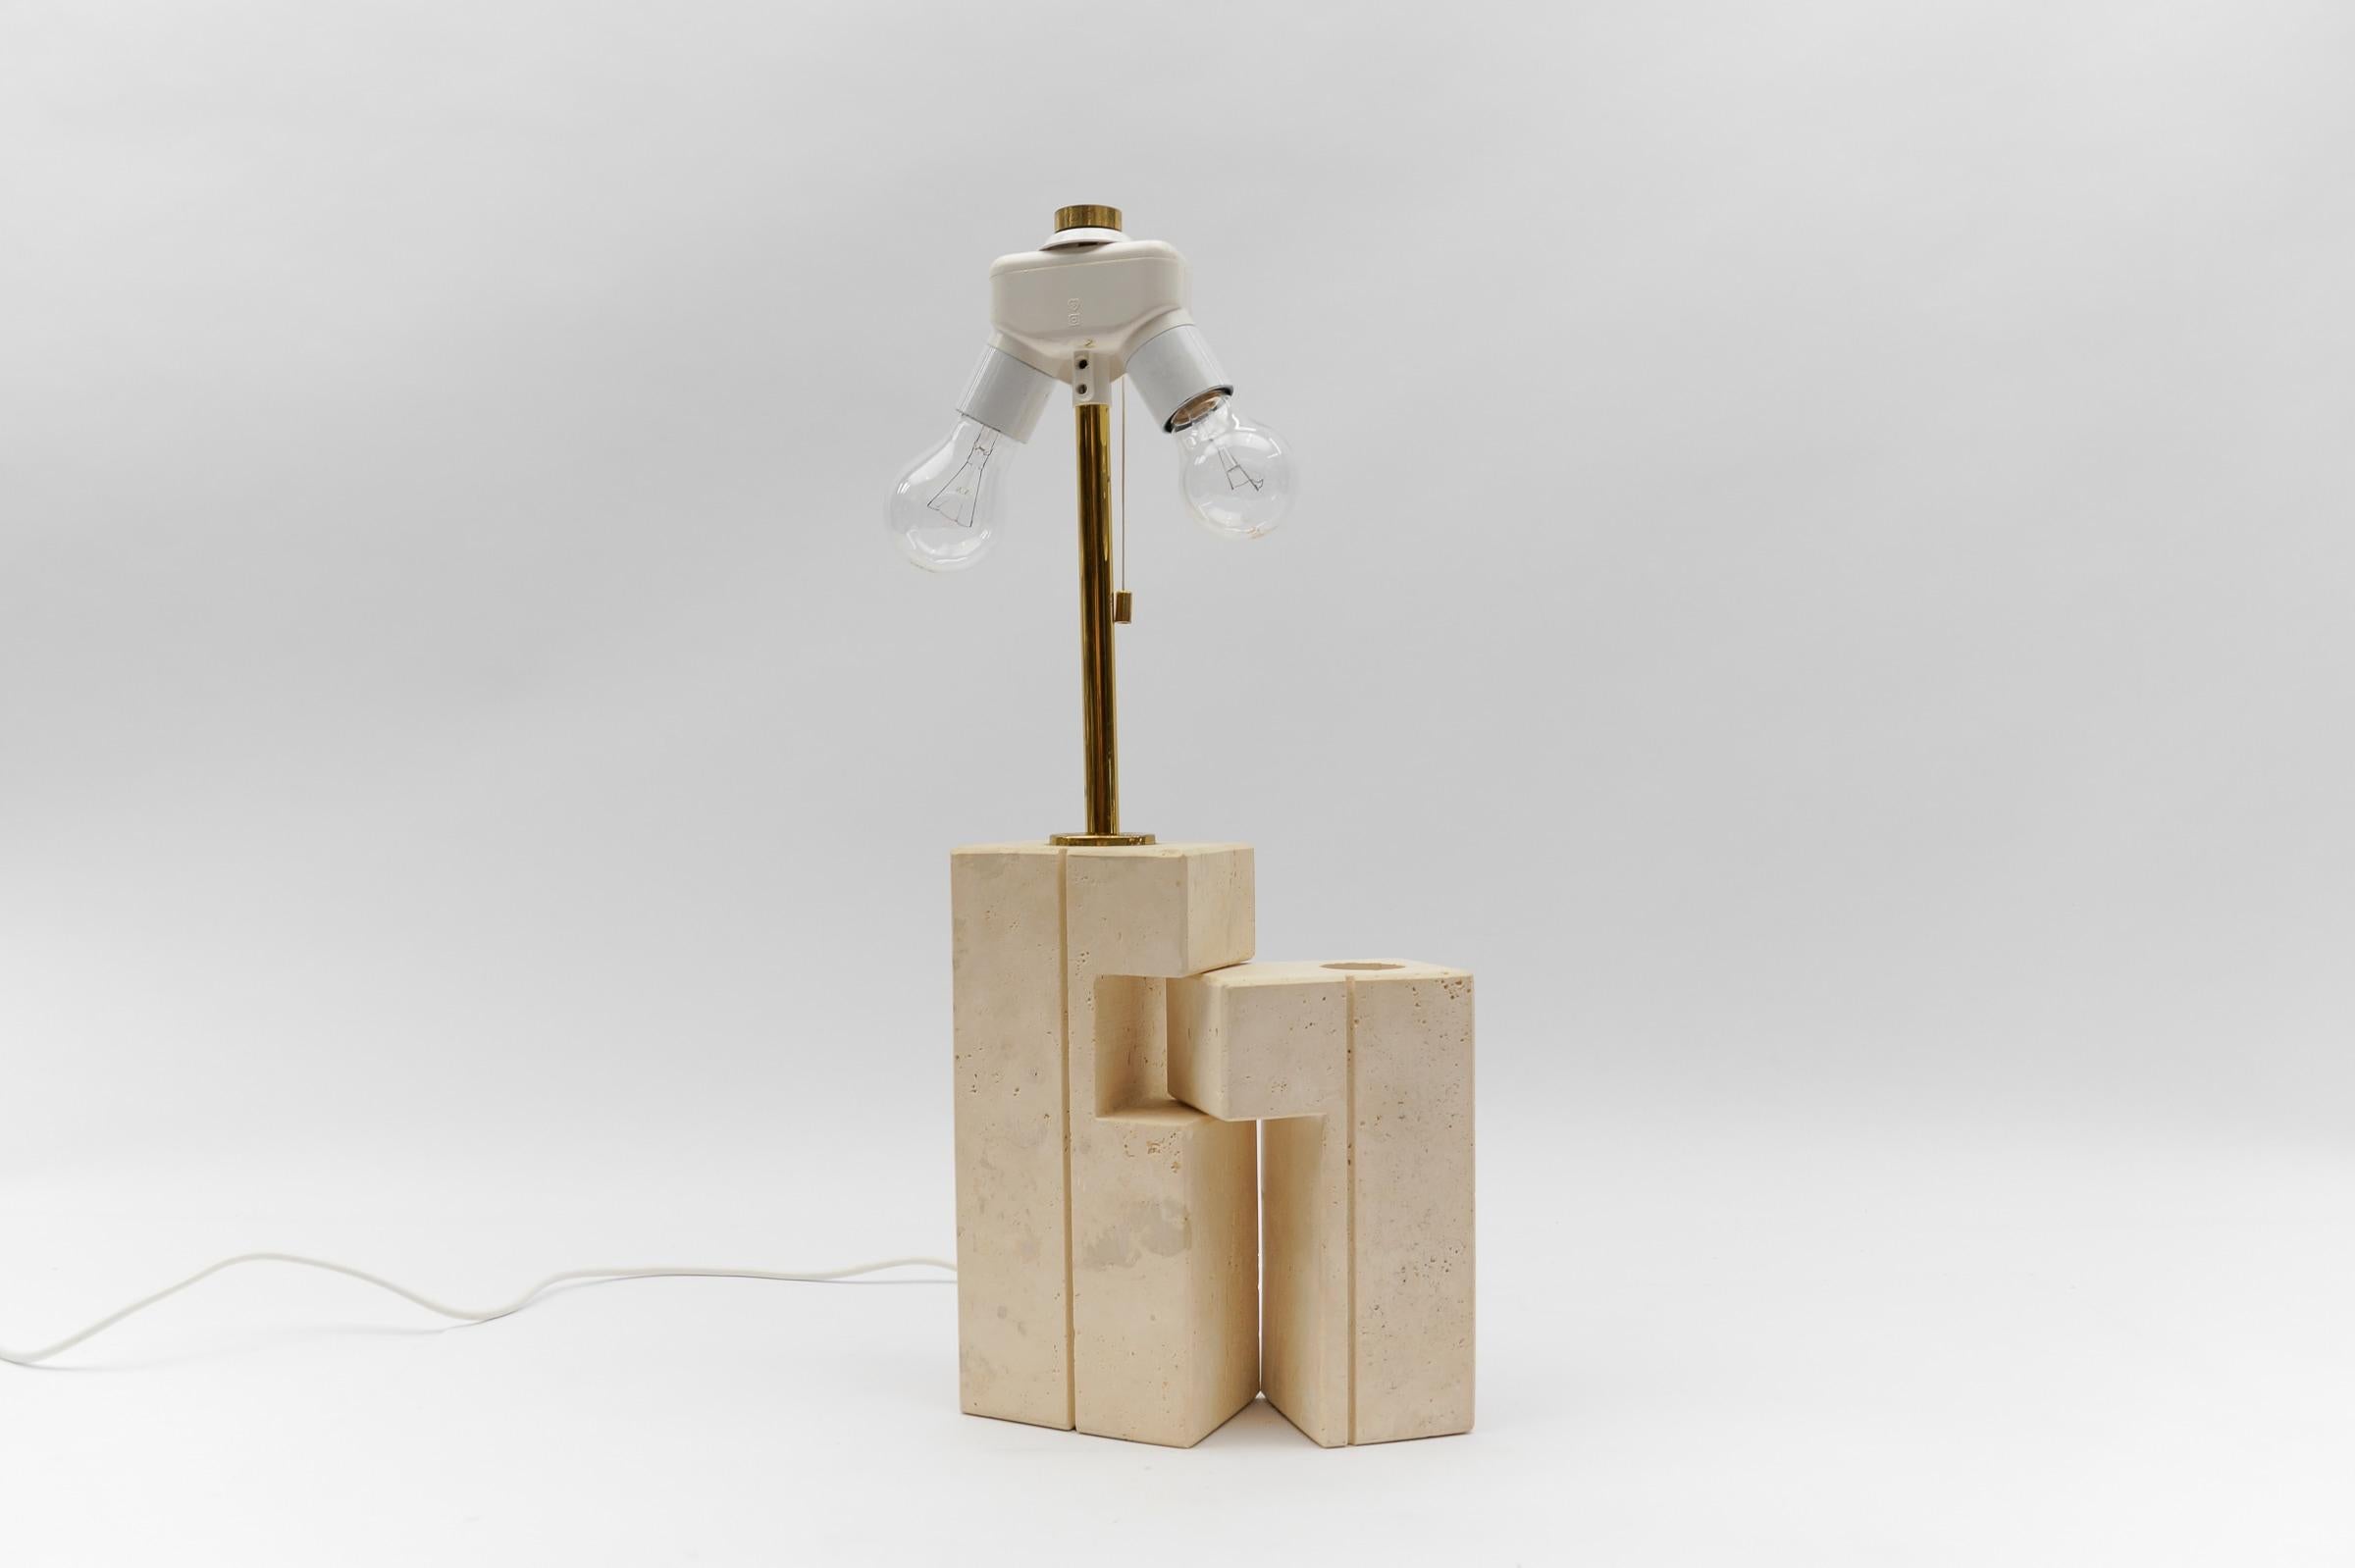 Lovely Travertine Table Lamp by Giuliano Cesari for Nucleo Sormani, 1960s, Italy

The lampshade is to illustrate how the lamp base looks with a shade. The shade has a diameter of 17.71 in. (45 cm) and height 11.41 in. (29 cm).

Very good condition.